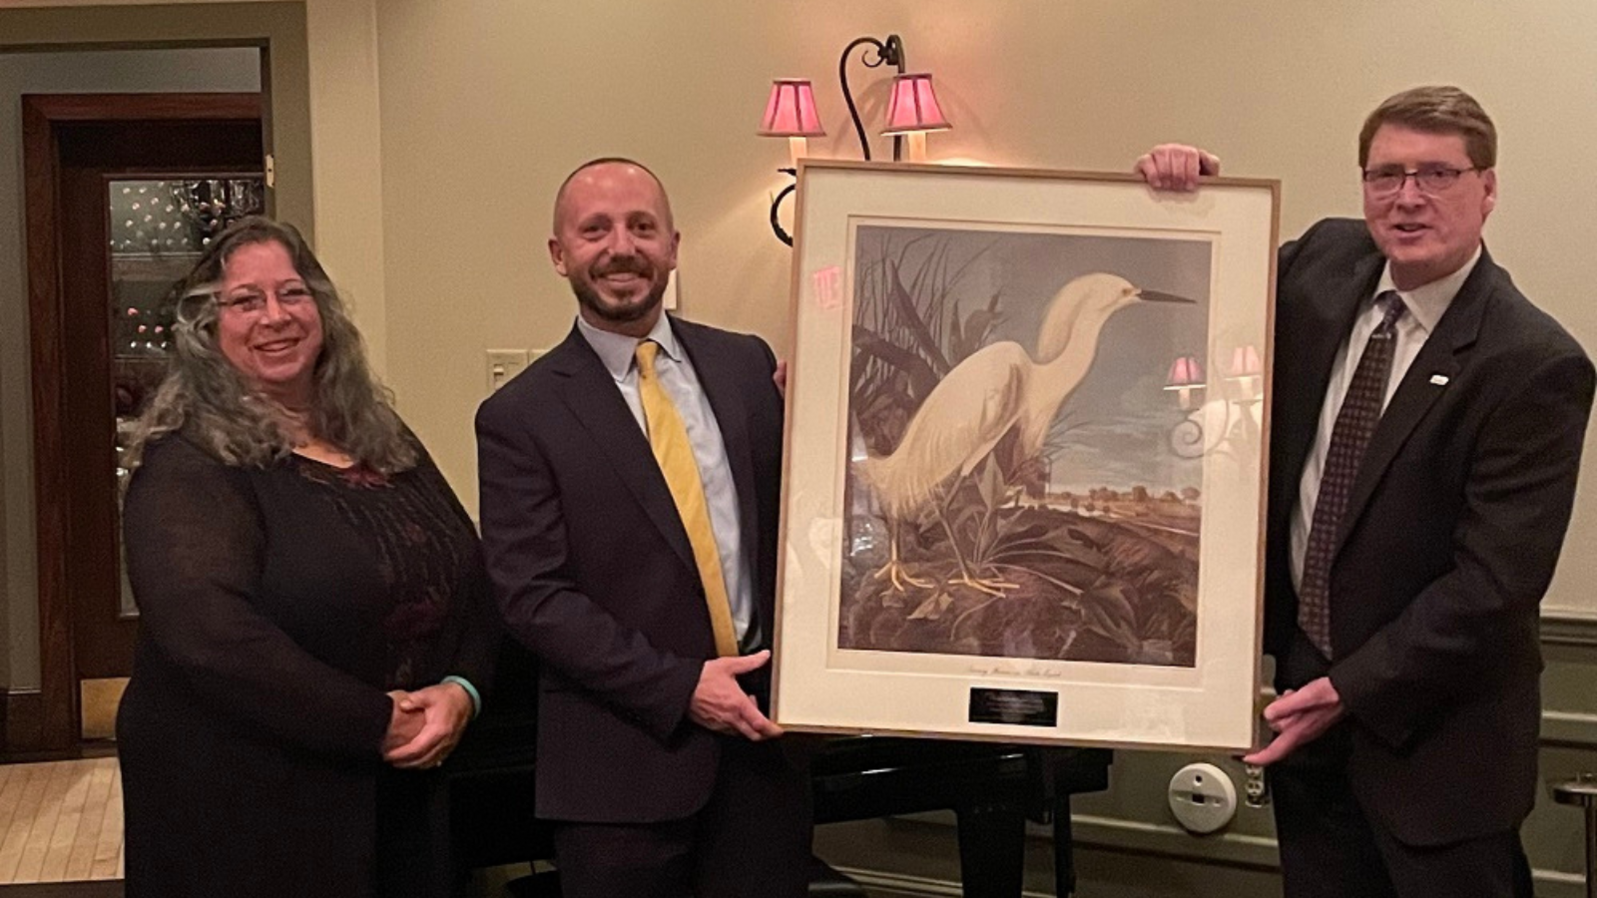 Audubon New York Executive Director Mike Burger and Board Chair of the Audubon Council Joy Cirigliano stand on either side of Commissioner Seggos, holding a large bird painting.